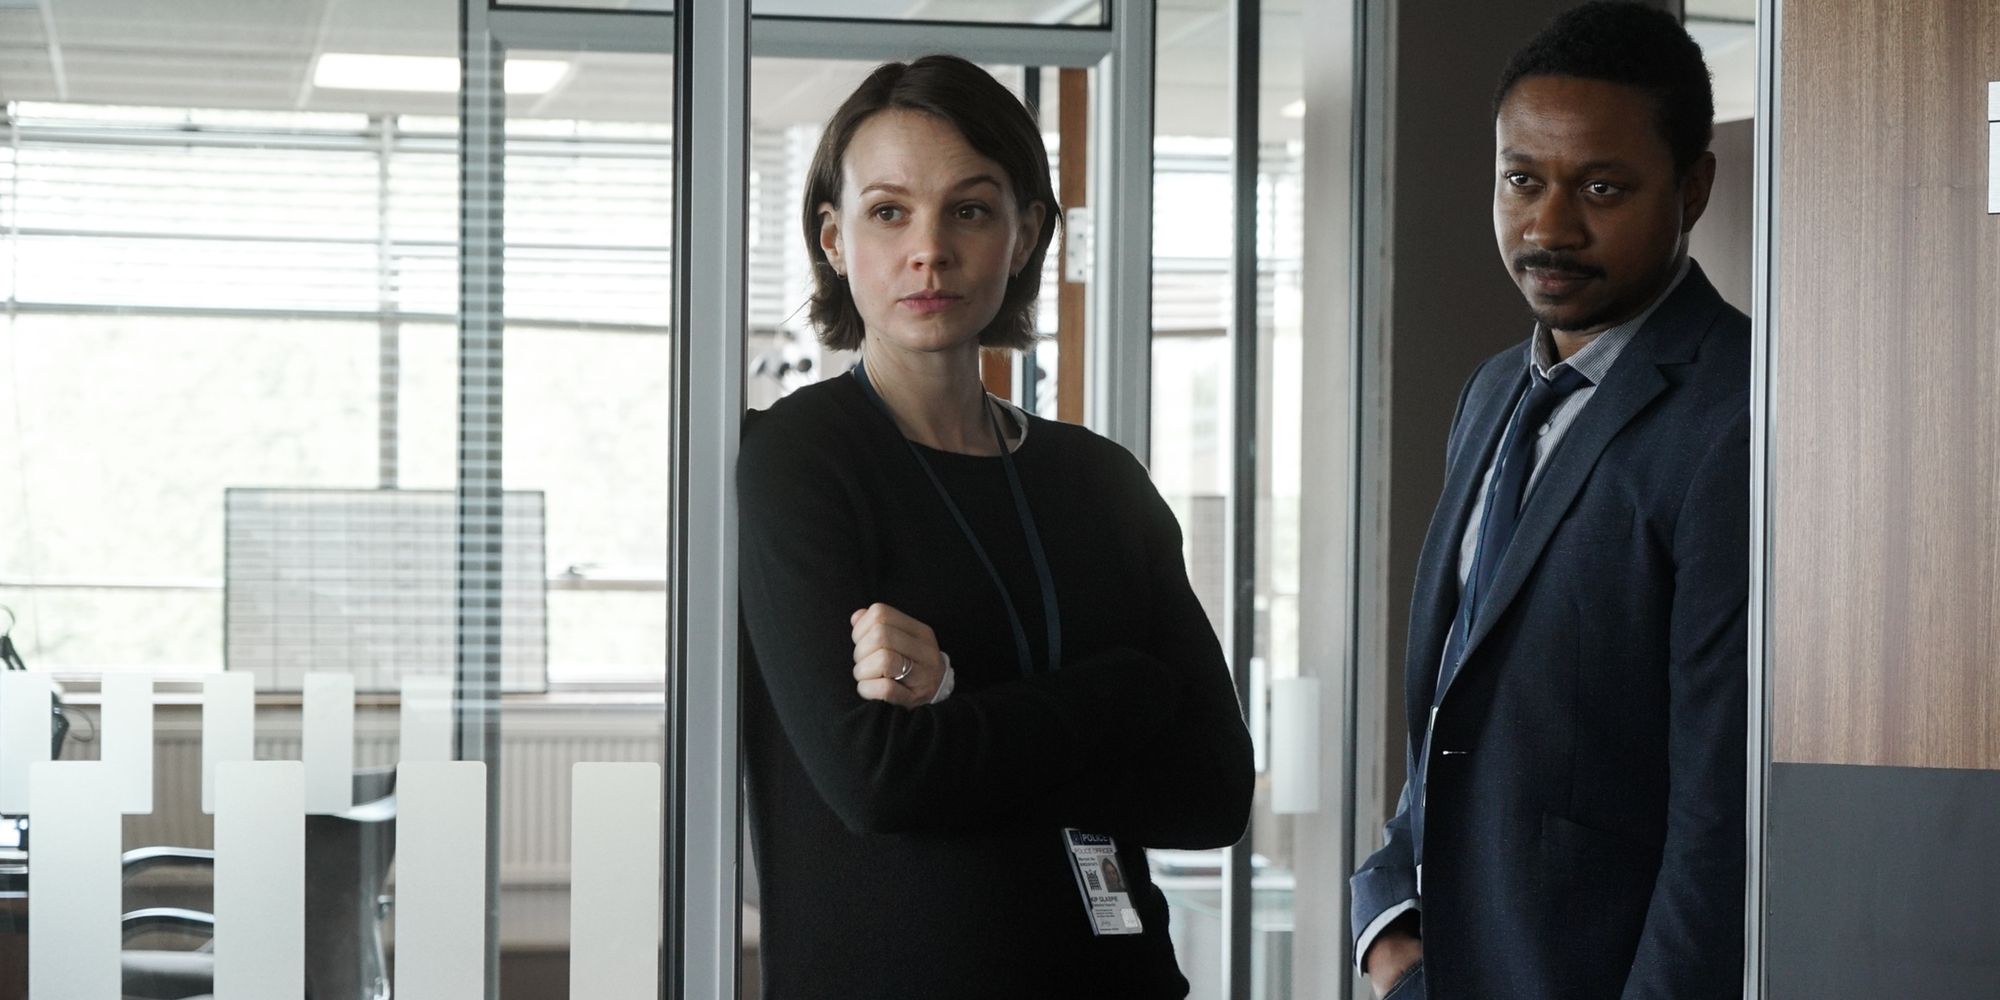 Carey Mulligan and Nathaniel Martello-White in a doorway in Collateral on Netflix